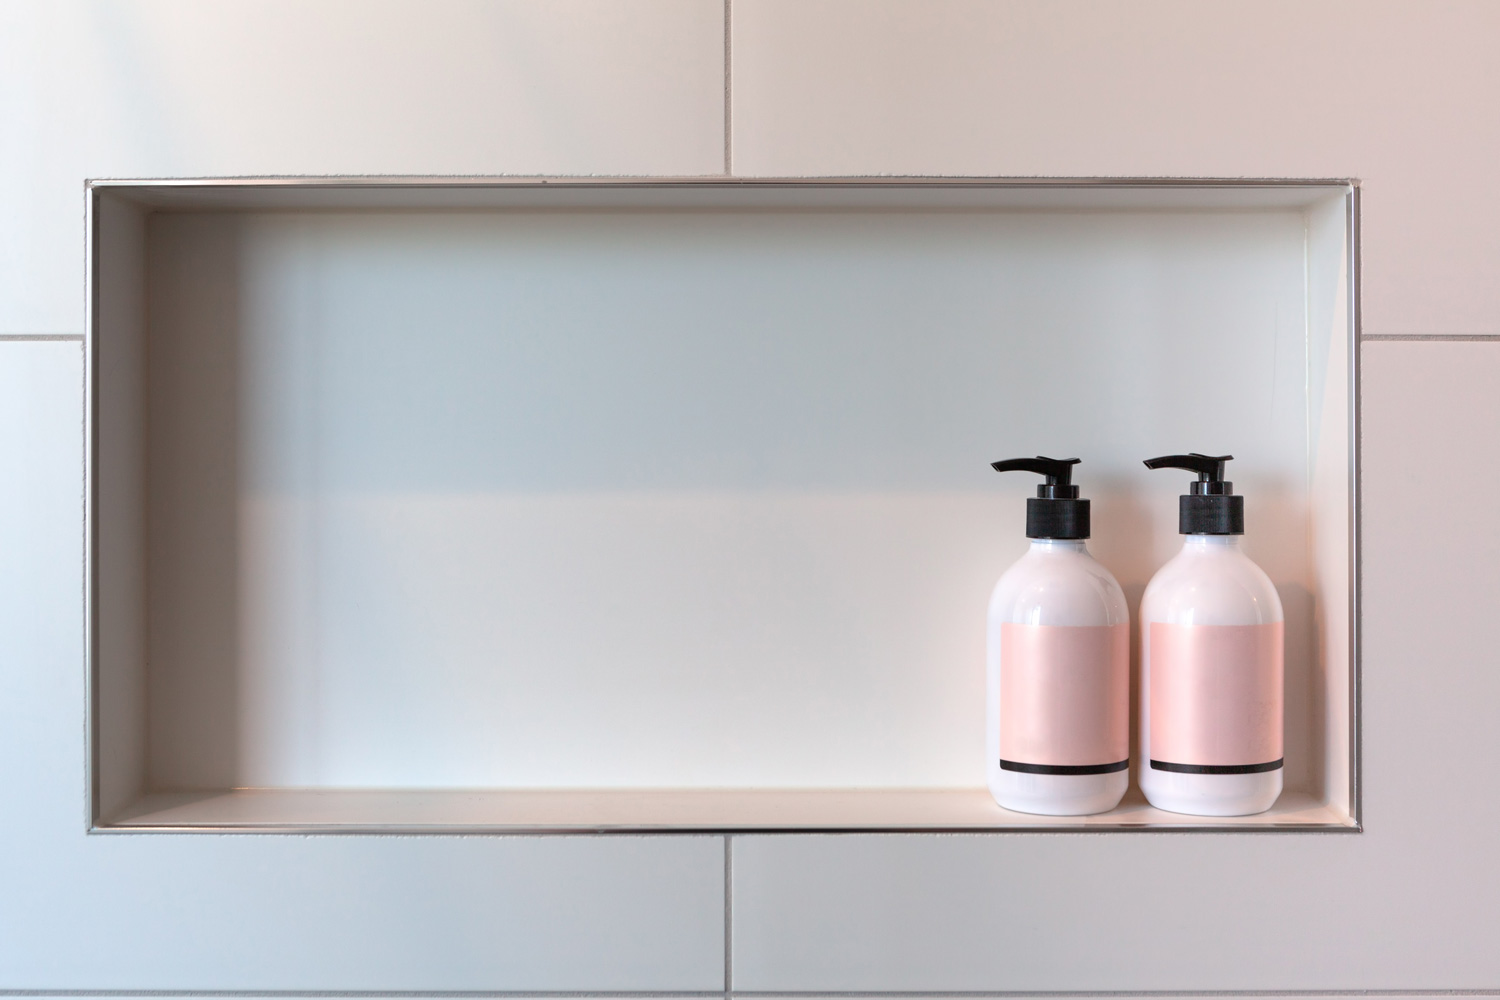 Shampoo and conditioner or shower gel dispensers in a rectangular niche made of white tiles with copy space